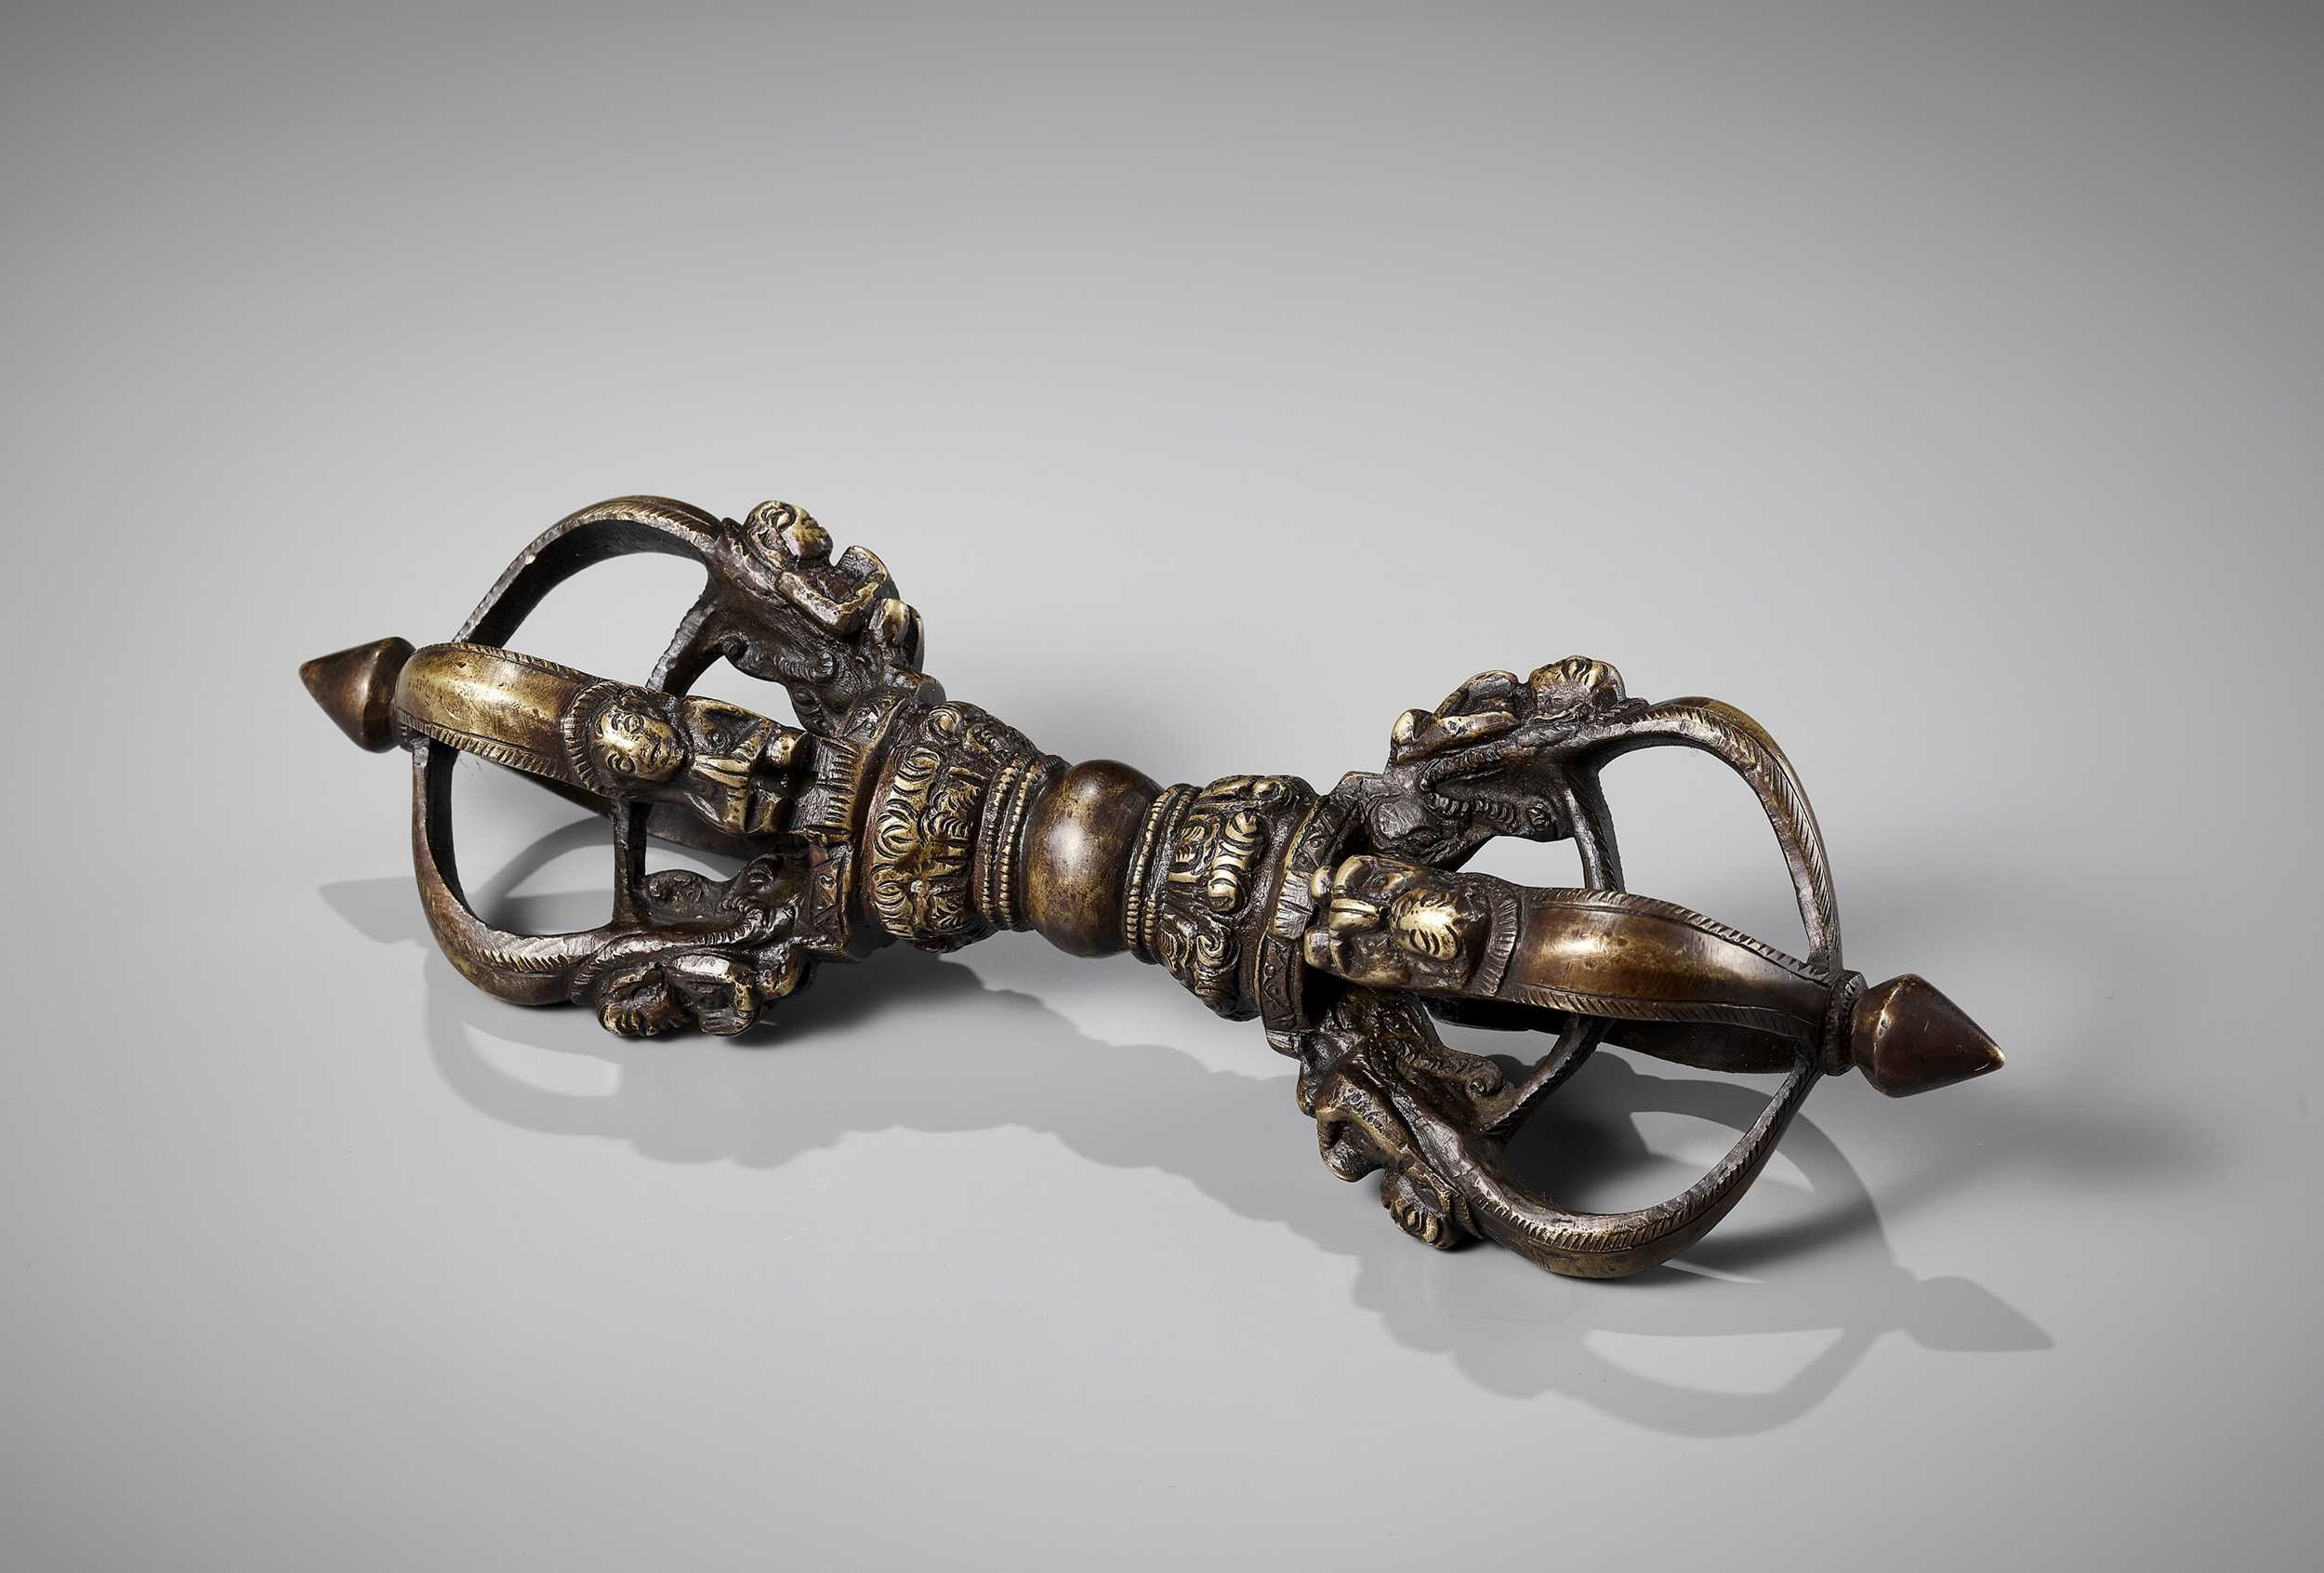 Lot 40 - A LARGE AND MASSIVE BRONZE VAJRA, 17TH-18TH CENTURY